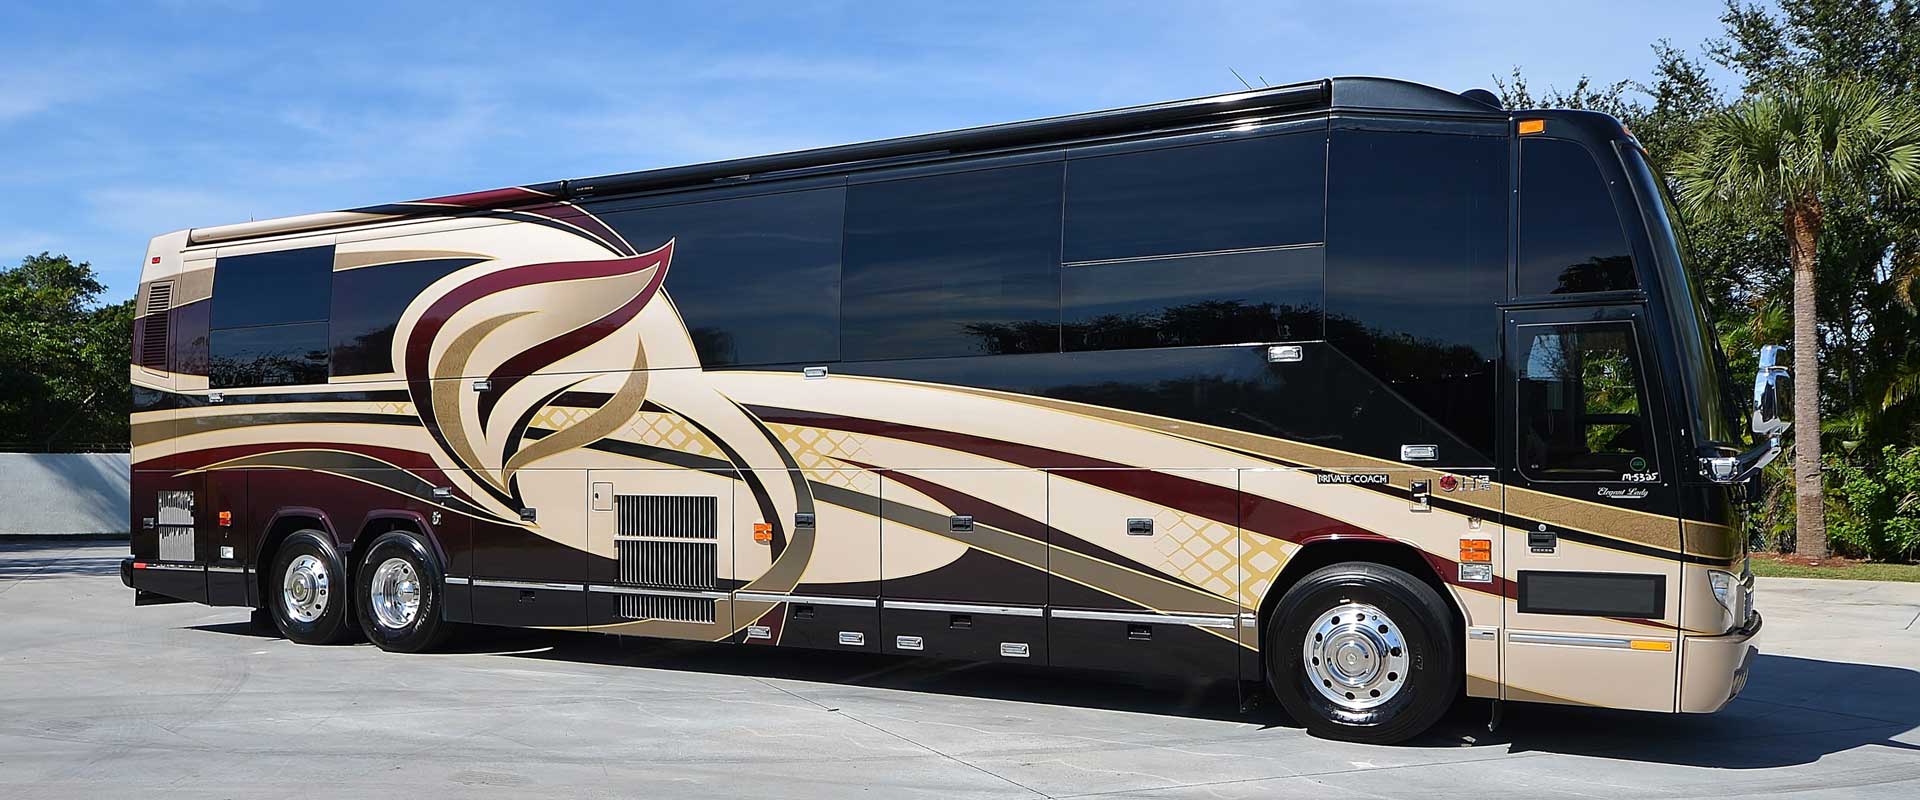 2010 Liberty Coach #M7184 exterior entry side front view of motorcoach on the lot